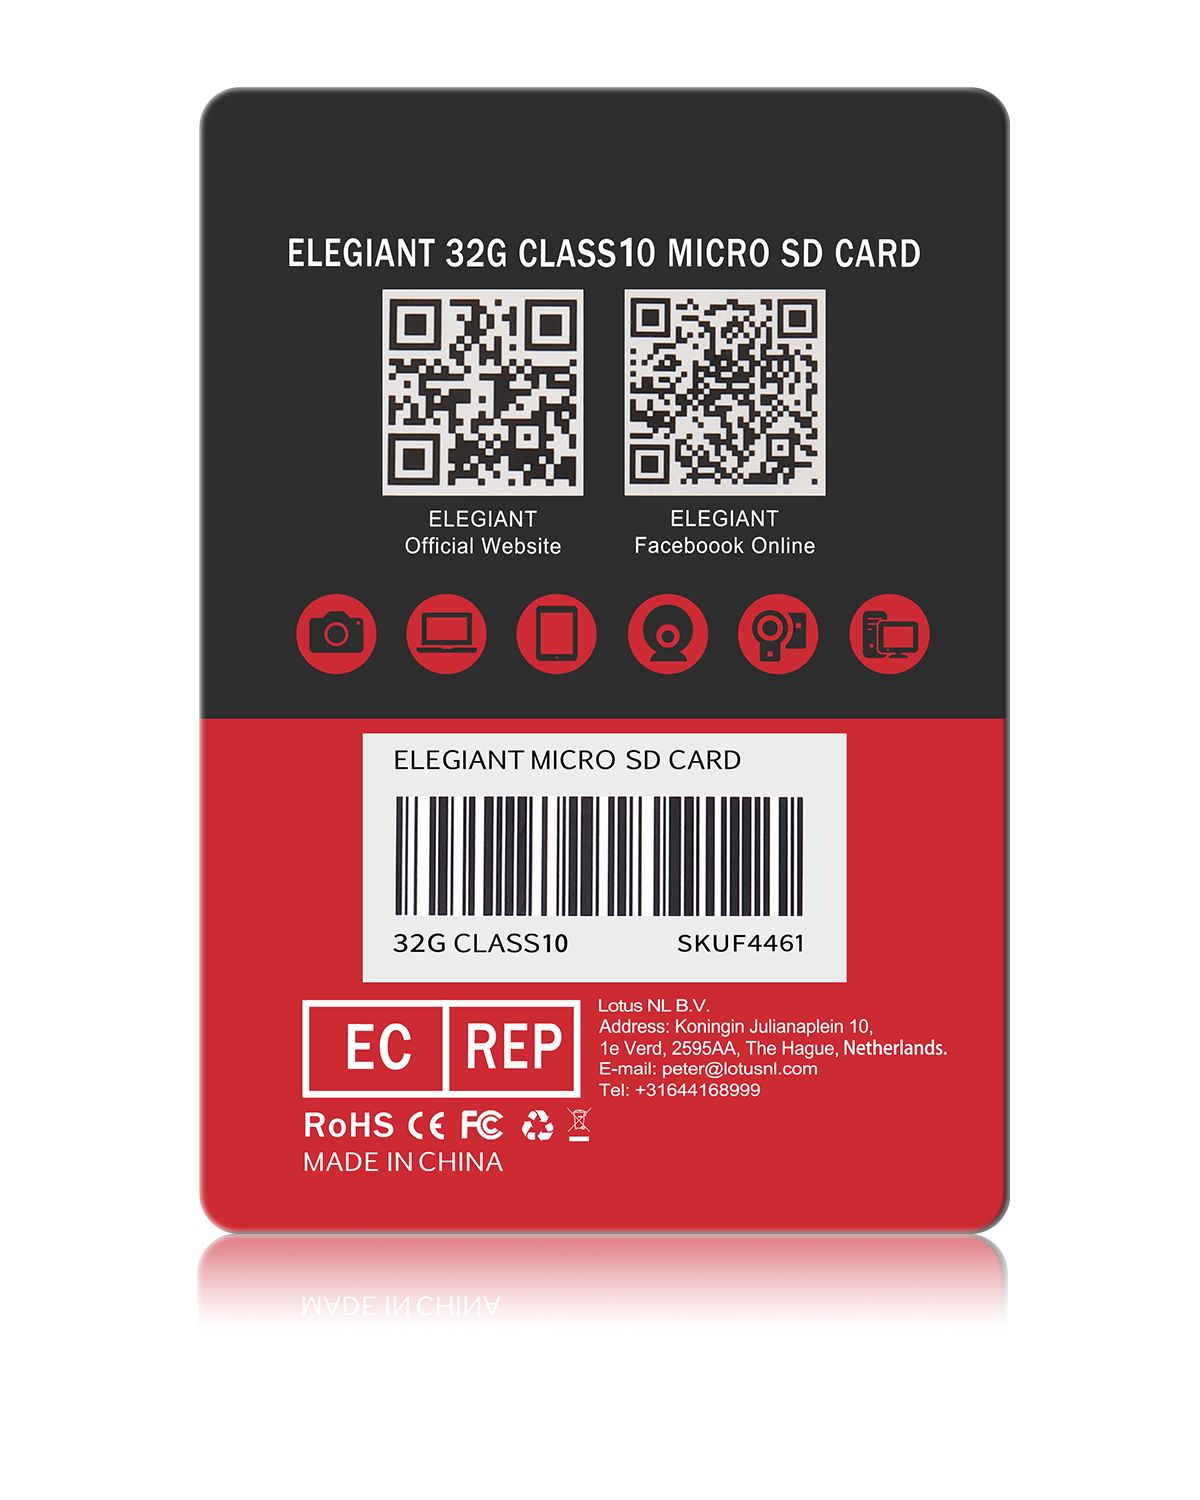 ELEGIANT-32GB-Memory-Card-Professional-Class-10-Card-Memory-Card-for-Computer-Cameras-and-Camcorders-1759959